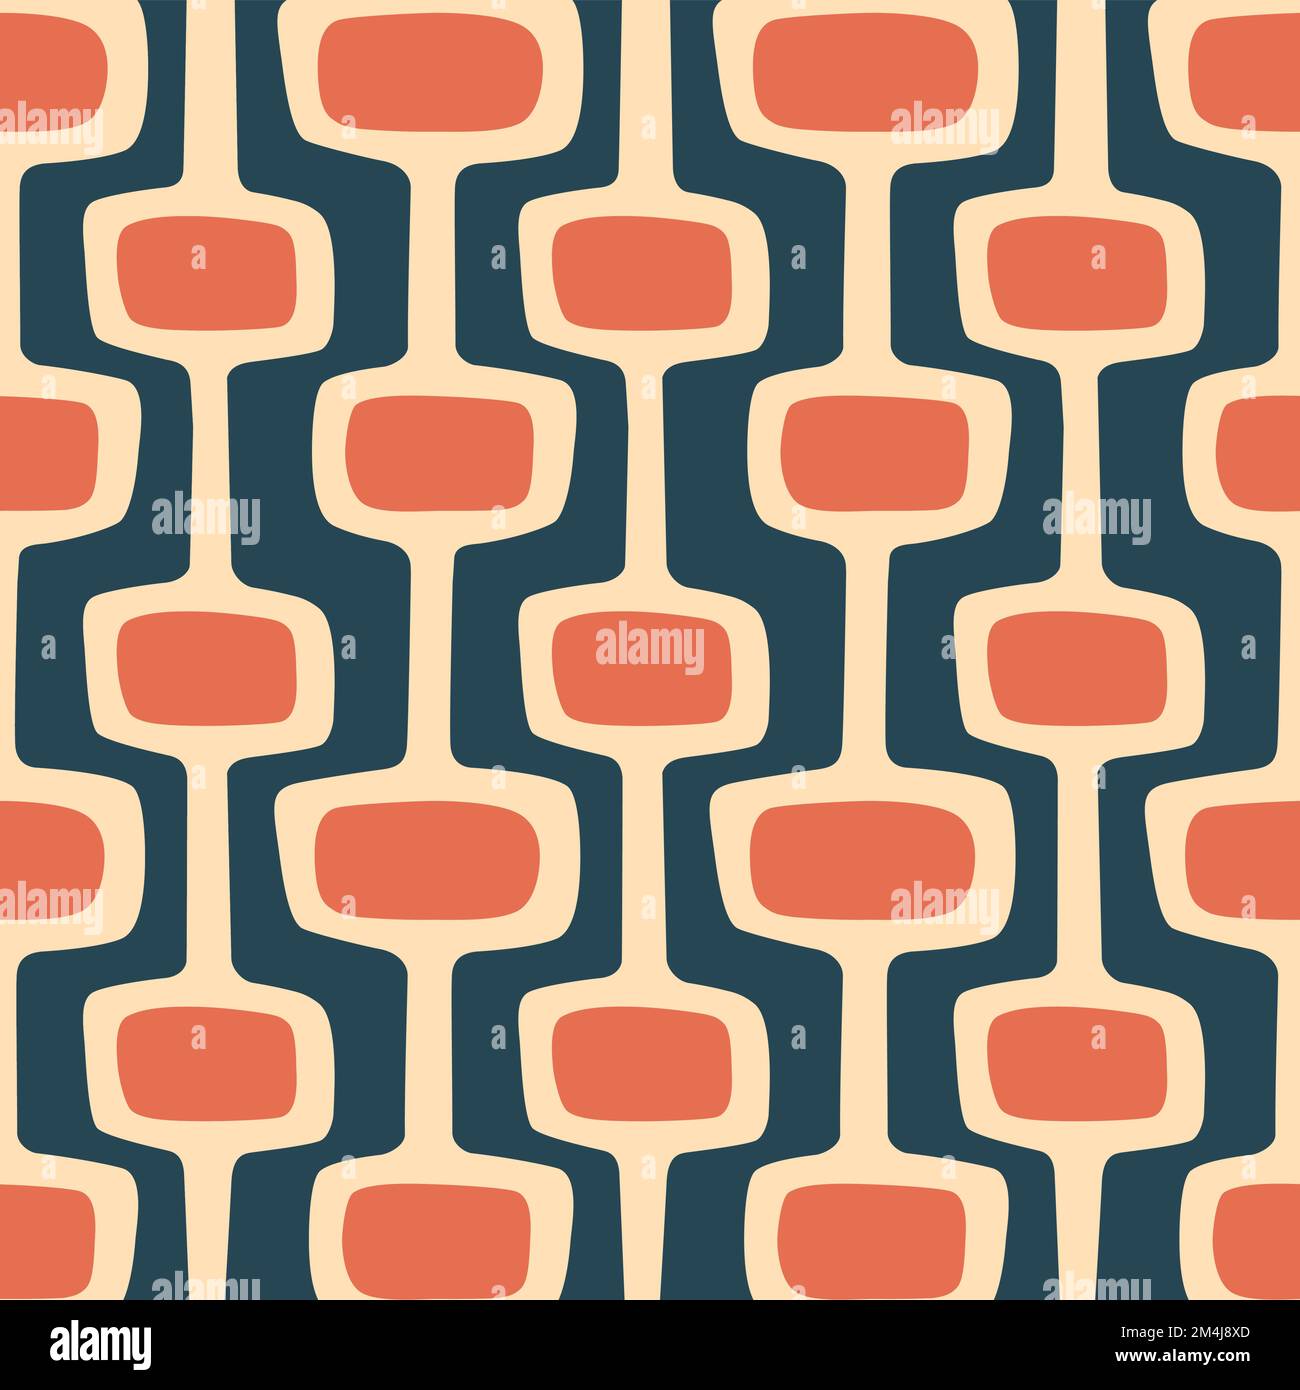 Mid-century modern atomic age background in blue, orange and cream. Ideal for wallpaper and fabric design. Stock Vector